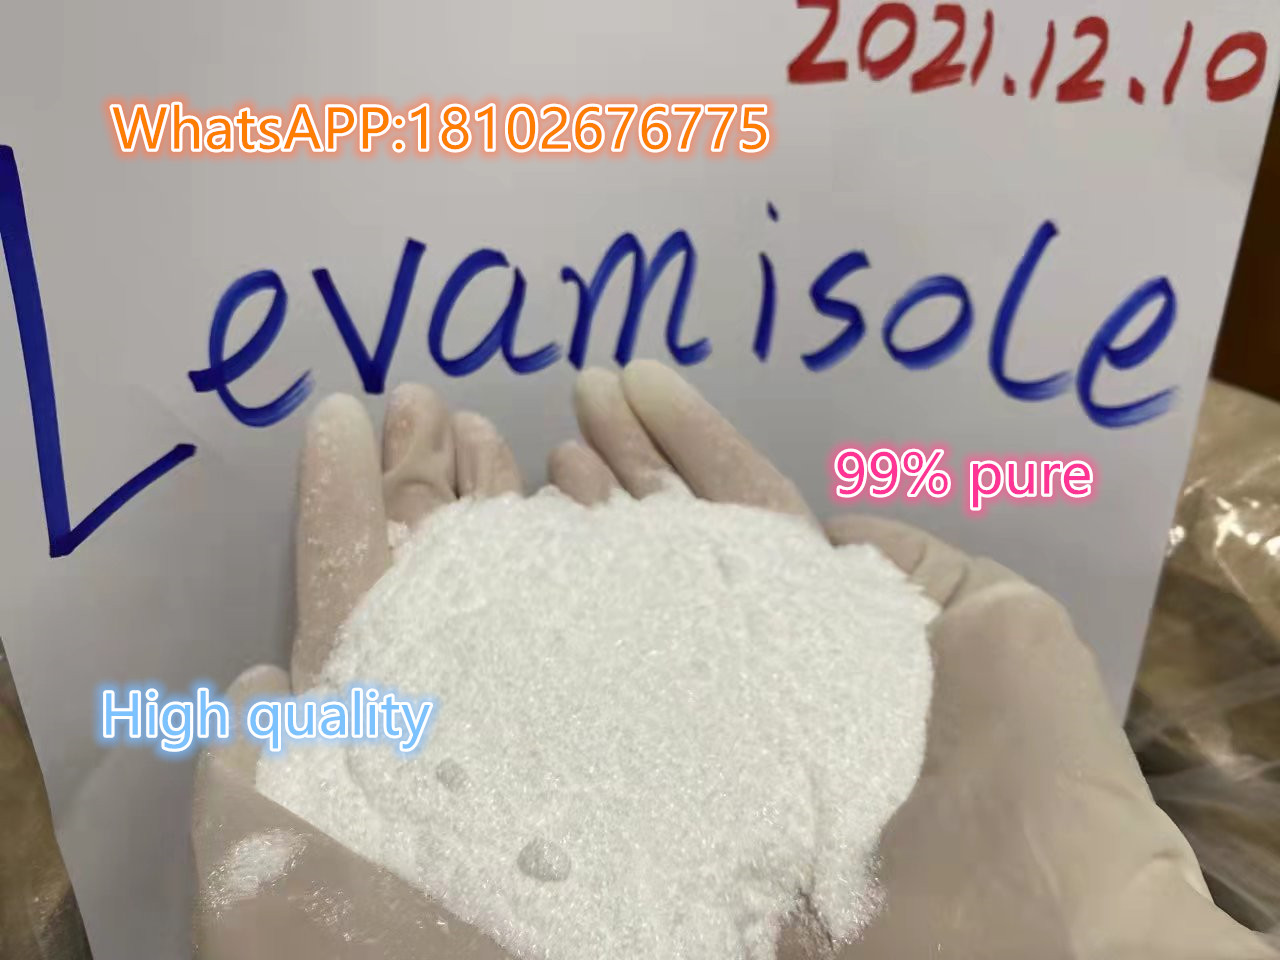 Ourope market 99% pure Levamisole hydrochloride/Levamisola hcl powder with USP/BP standard  